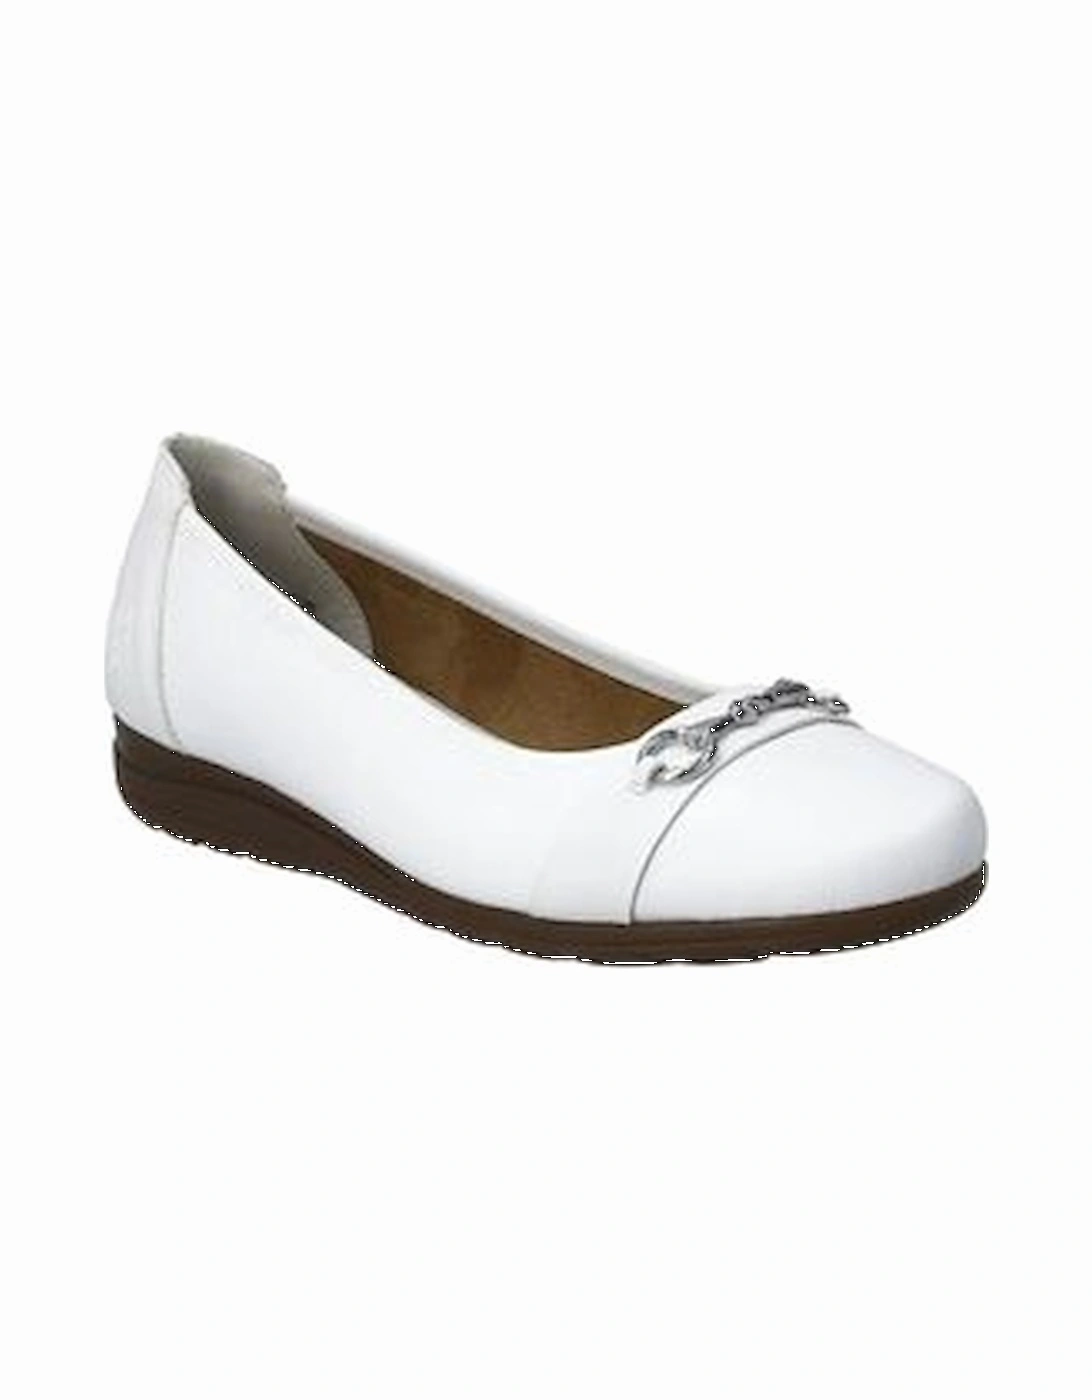 L9360-80 white leather pump, 2 of 1